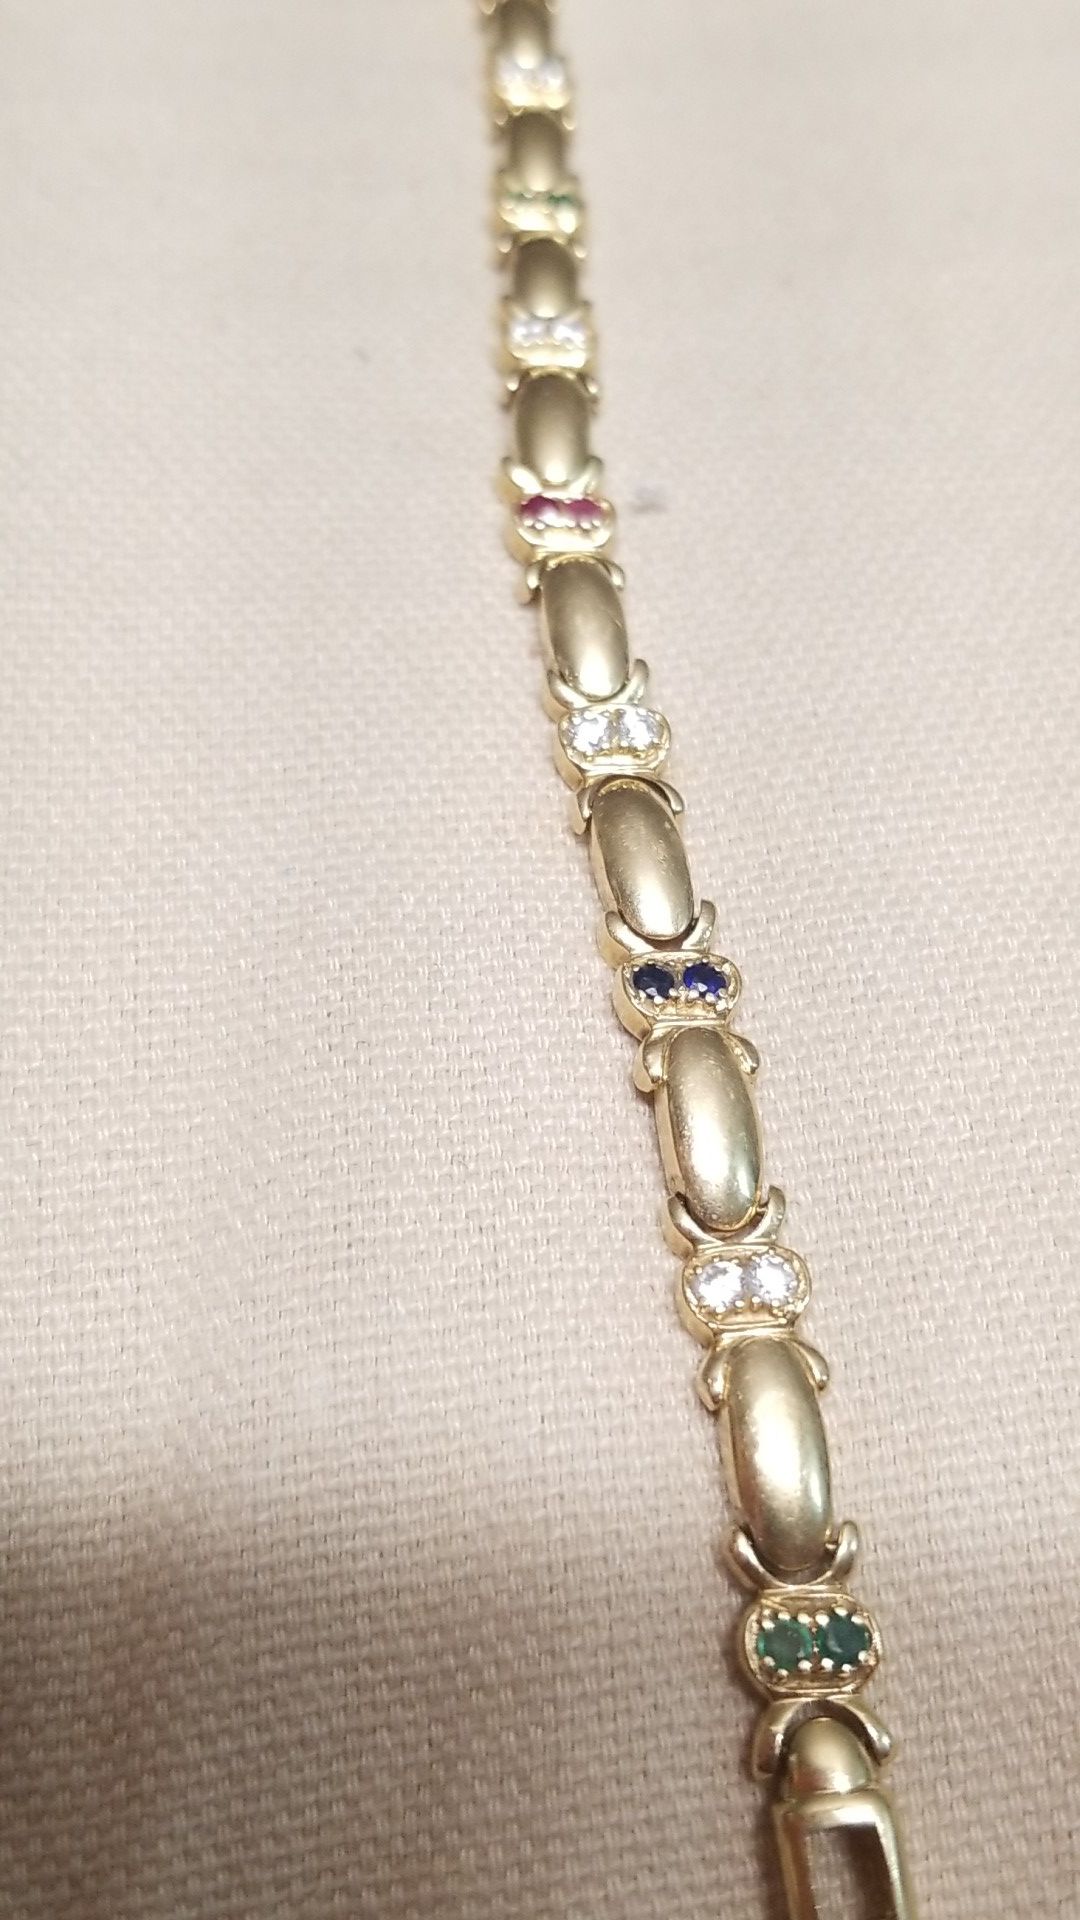 STUNNING 14K GOLD BRACELET WITH RUBY,EMERALD, SAPPHIRE AND CUBIC ZIRCONIA